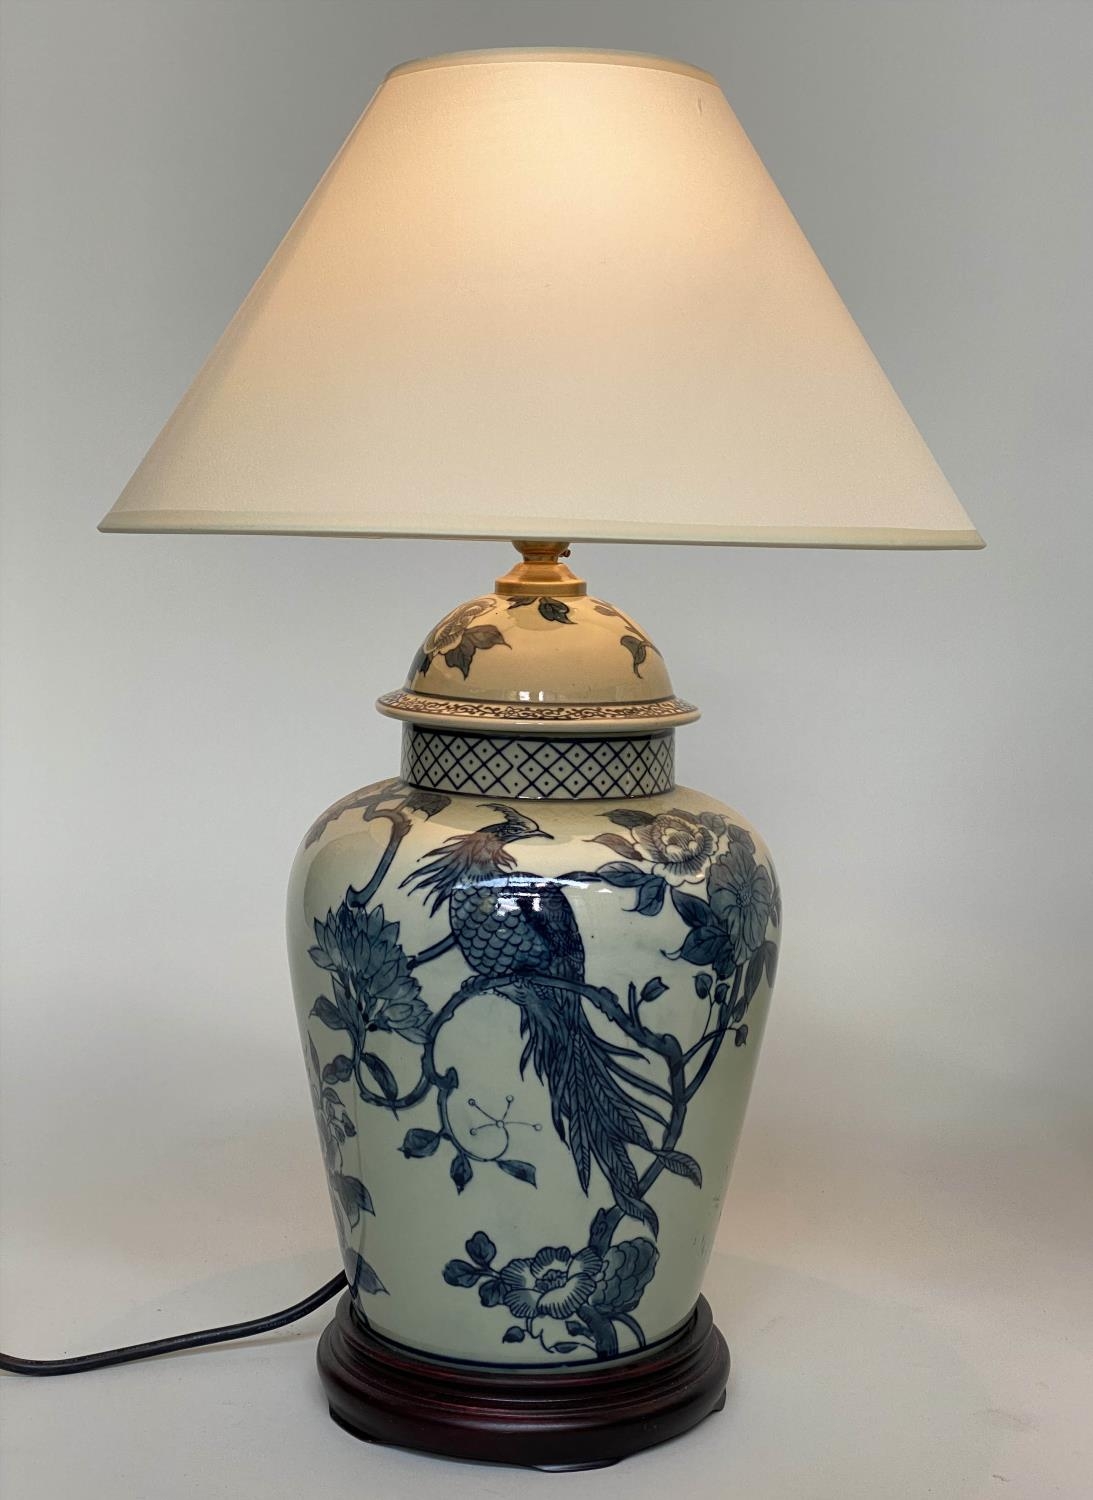 TABLE LAMPS, a pair, Chinese blue and white ceramic of ginger jar form depicting birds of - Image 4 of 4